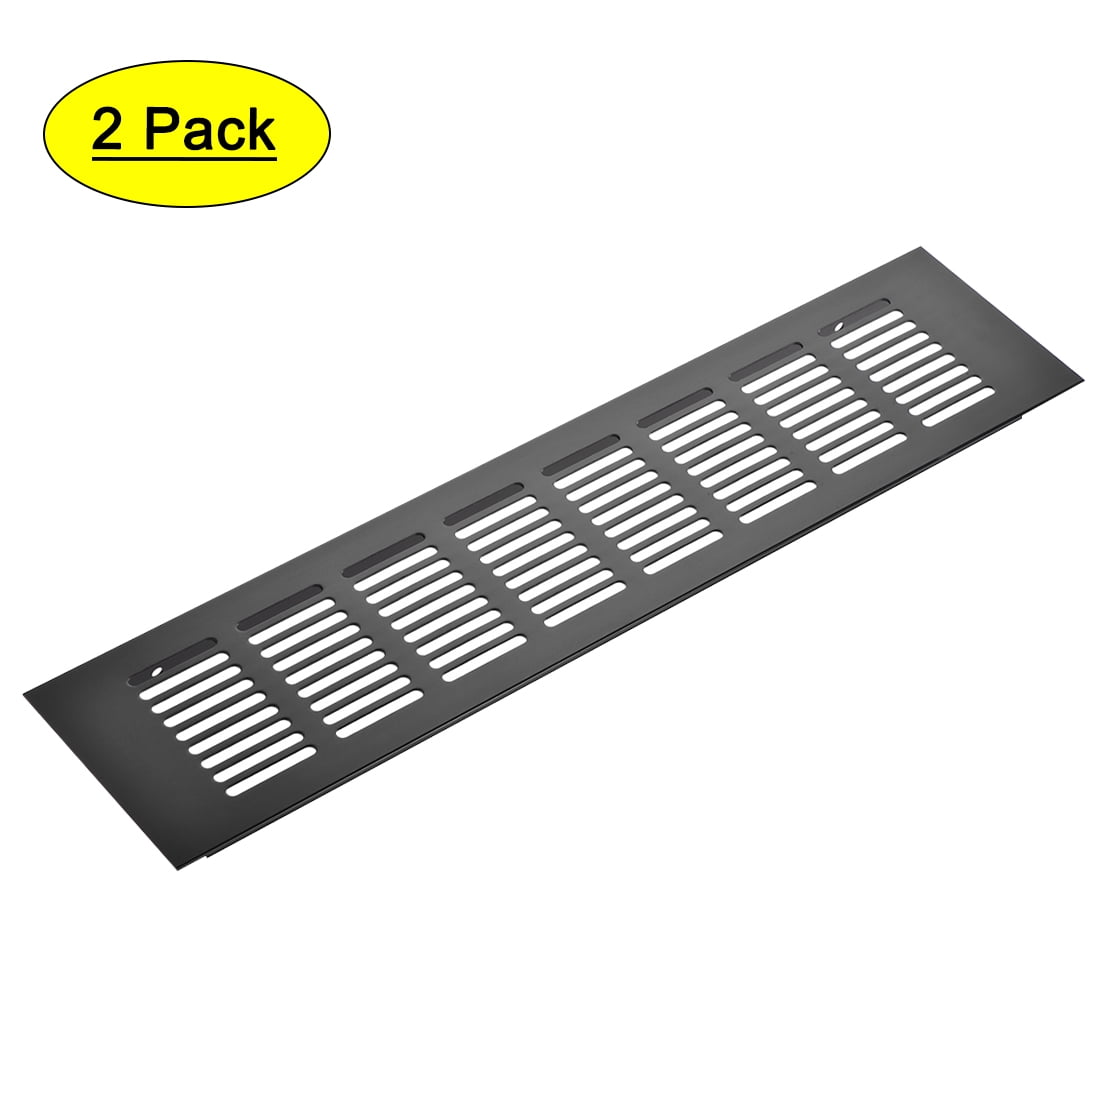 Magnetic Vent Covers 4 Pcs - HVAC Premium Anisotropic 1.5mm Optimal Thickness - 8 x 15.5 inch - for Wall, Floor, Ceiling Vent Covers - Trap & Seal Air